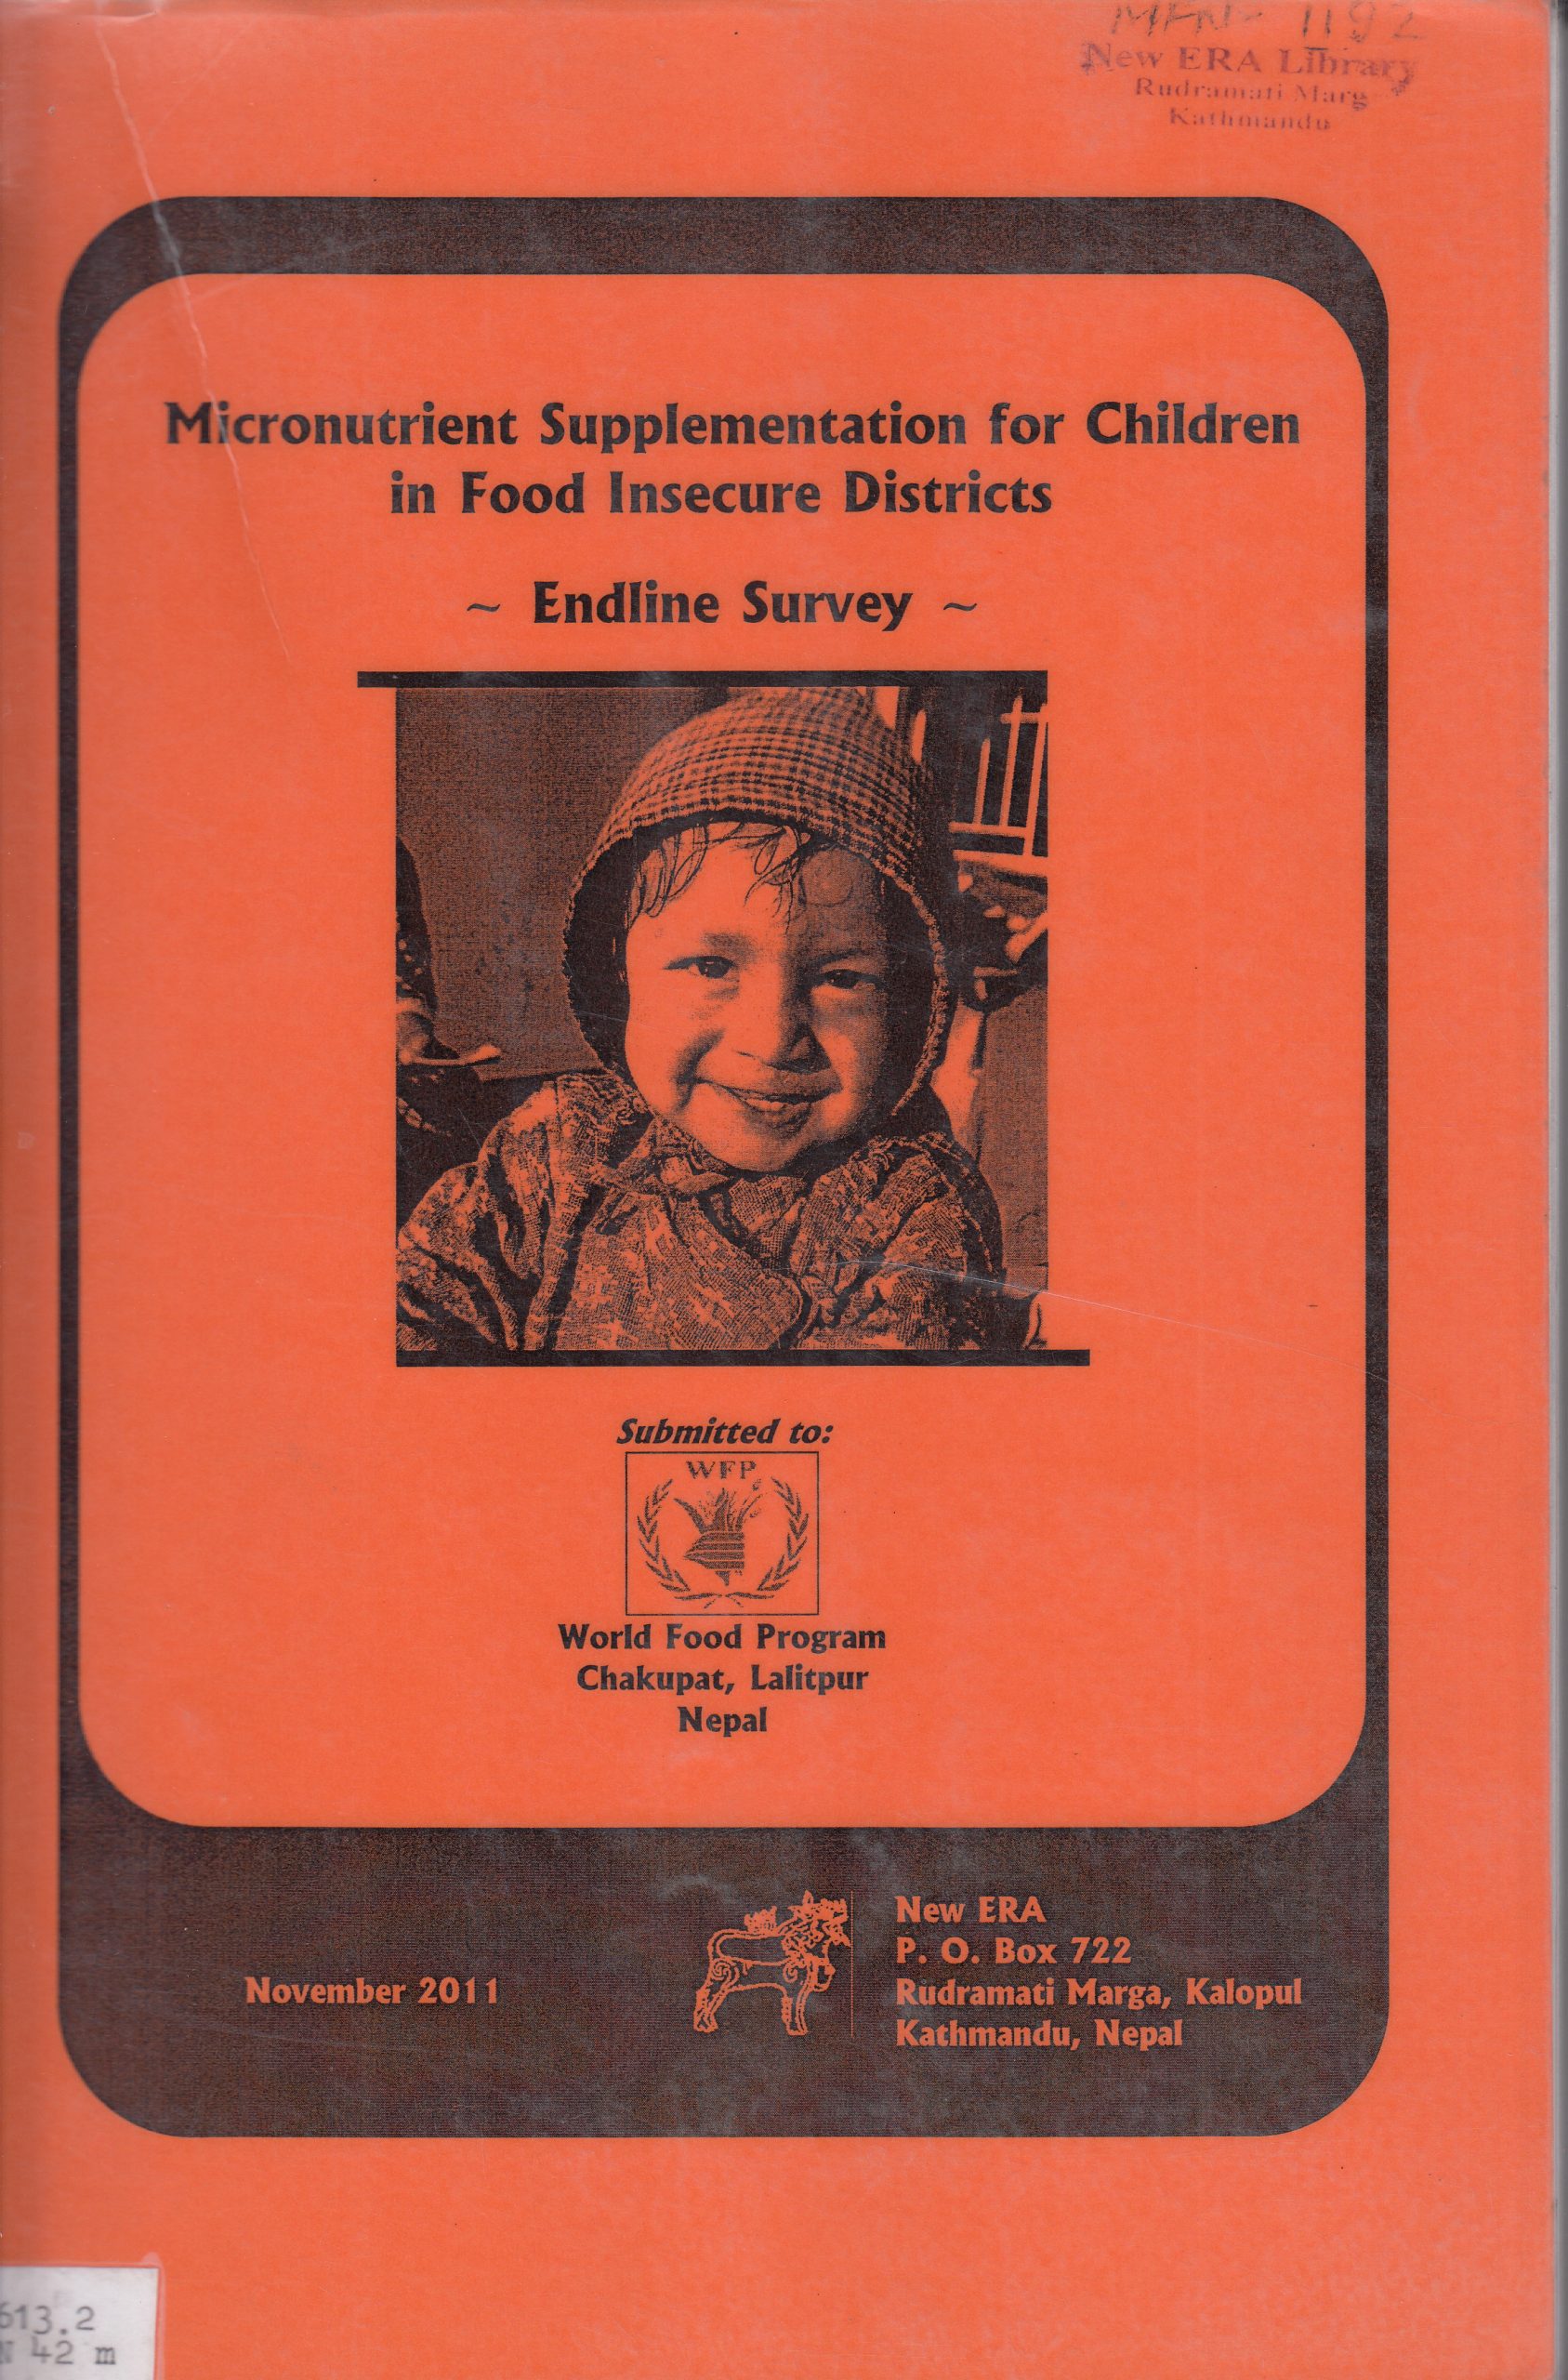 Micronutrient Supplementation for Children in Food Insecure Districts – End-line Survey